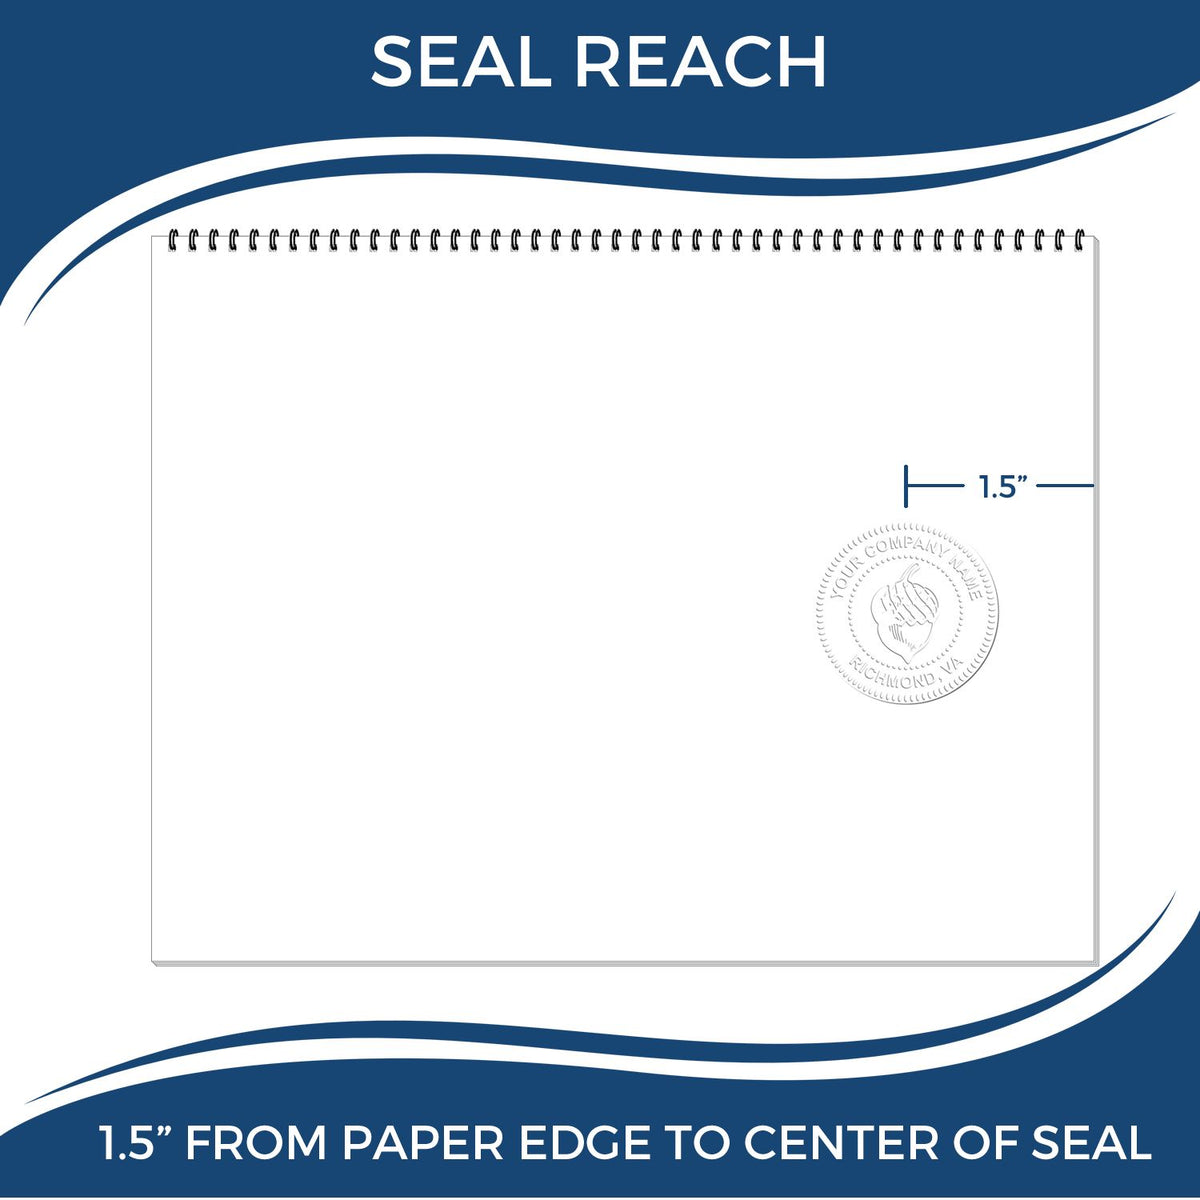 An infographic showing the seal reach which is represented by a ruler and a miniature seal image of the Gift Hawaii Geologist Seal